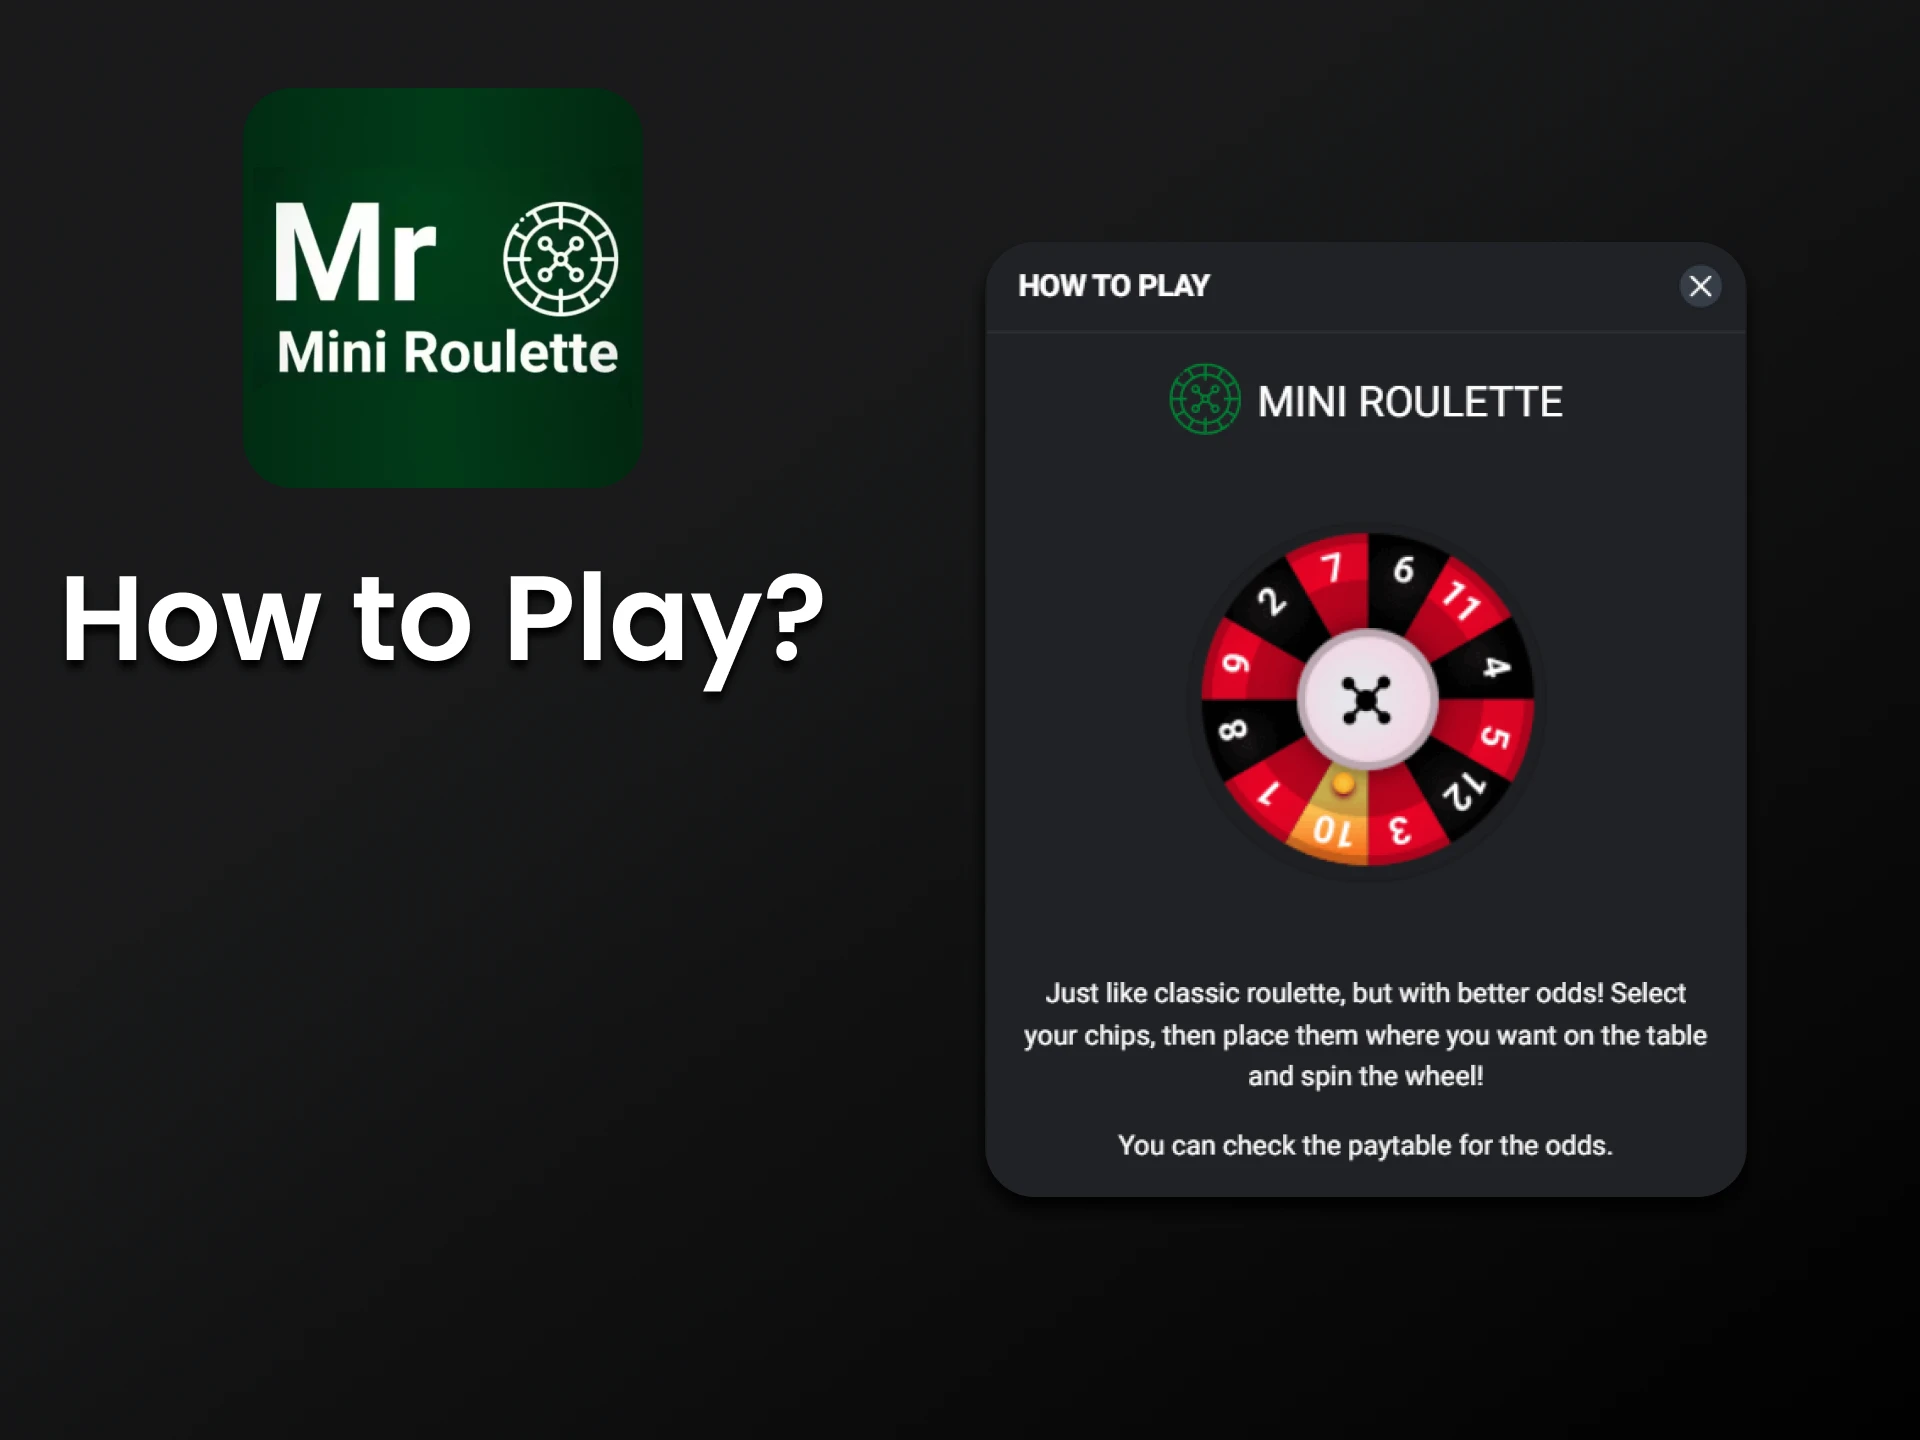 We will tell you how to start playing Mini Roulette.